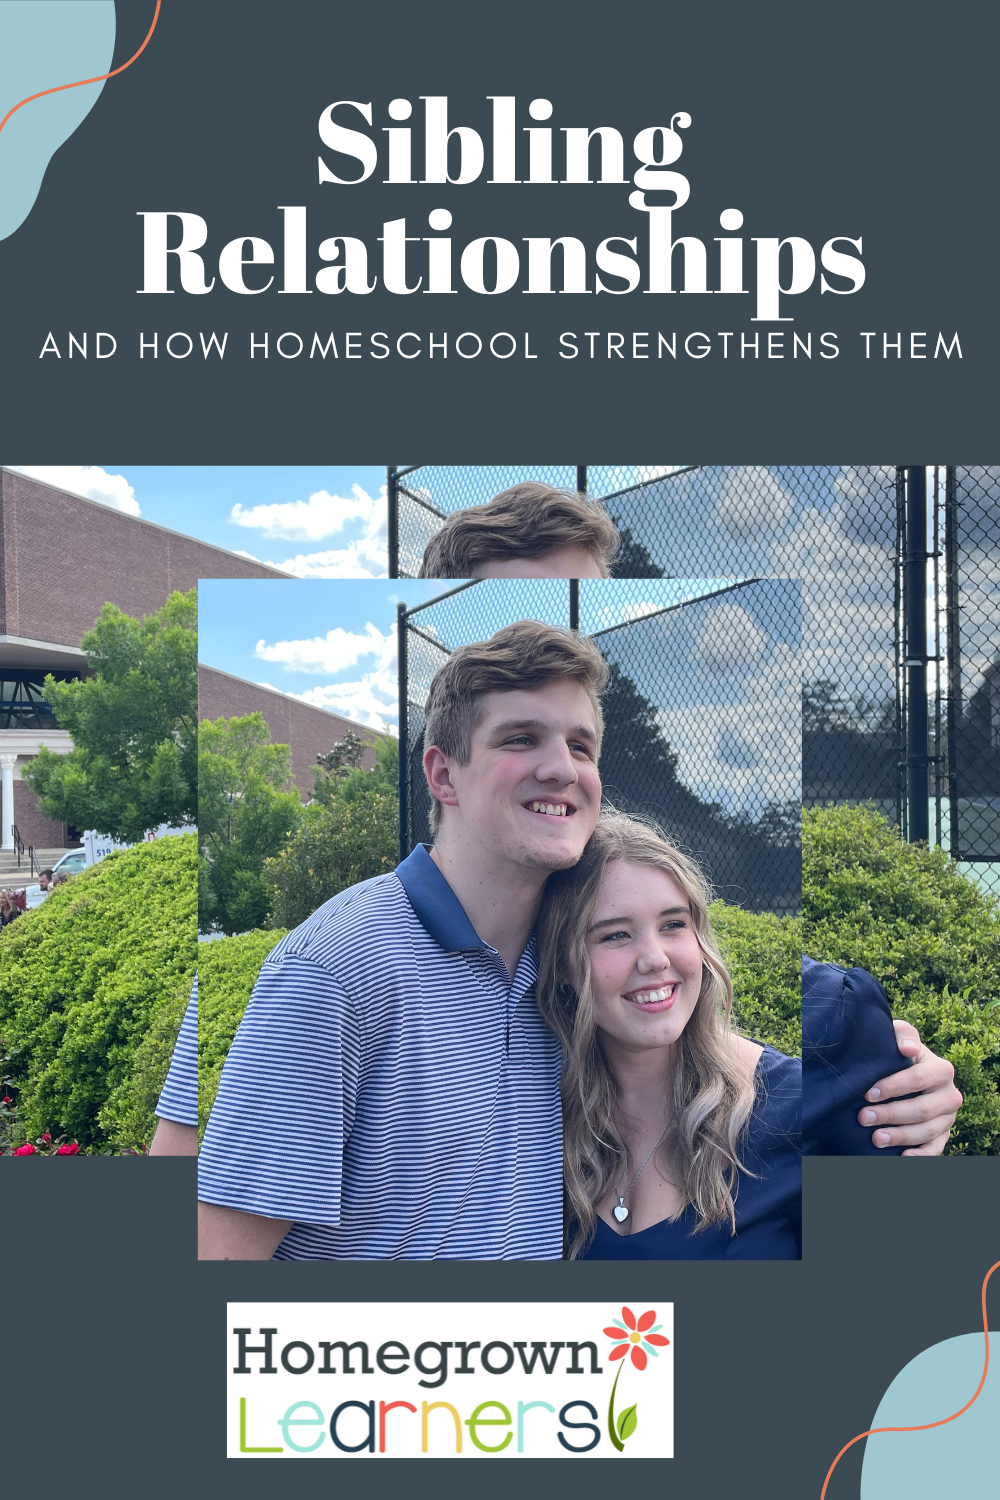 Sibling Relationships and How Homeschool Strengthens Them